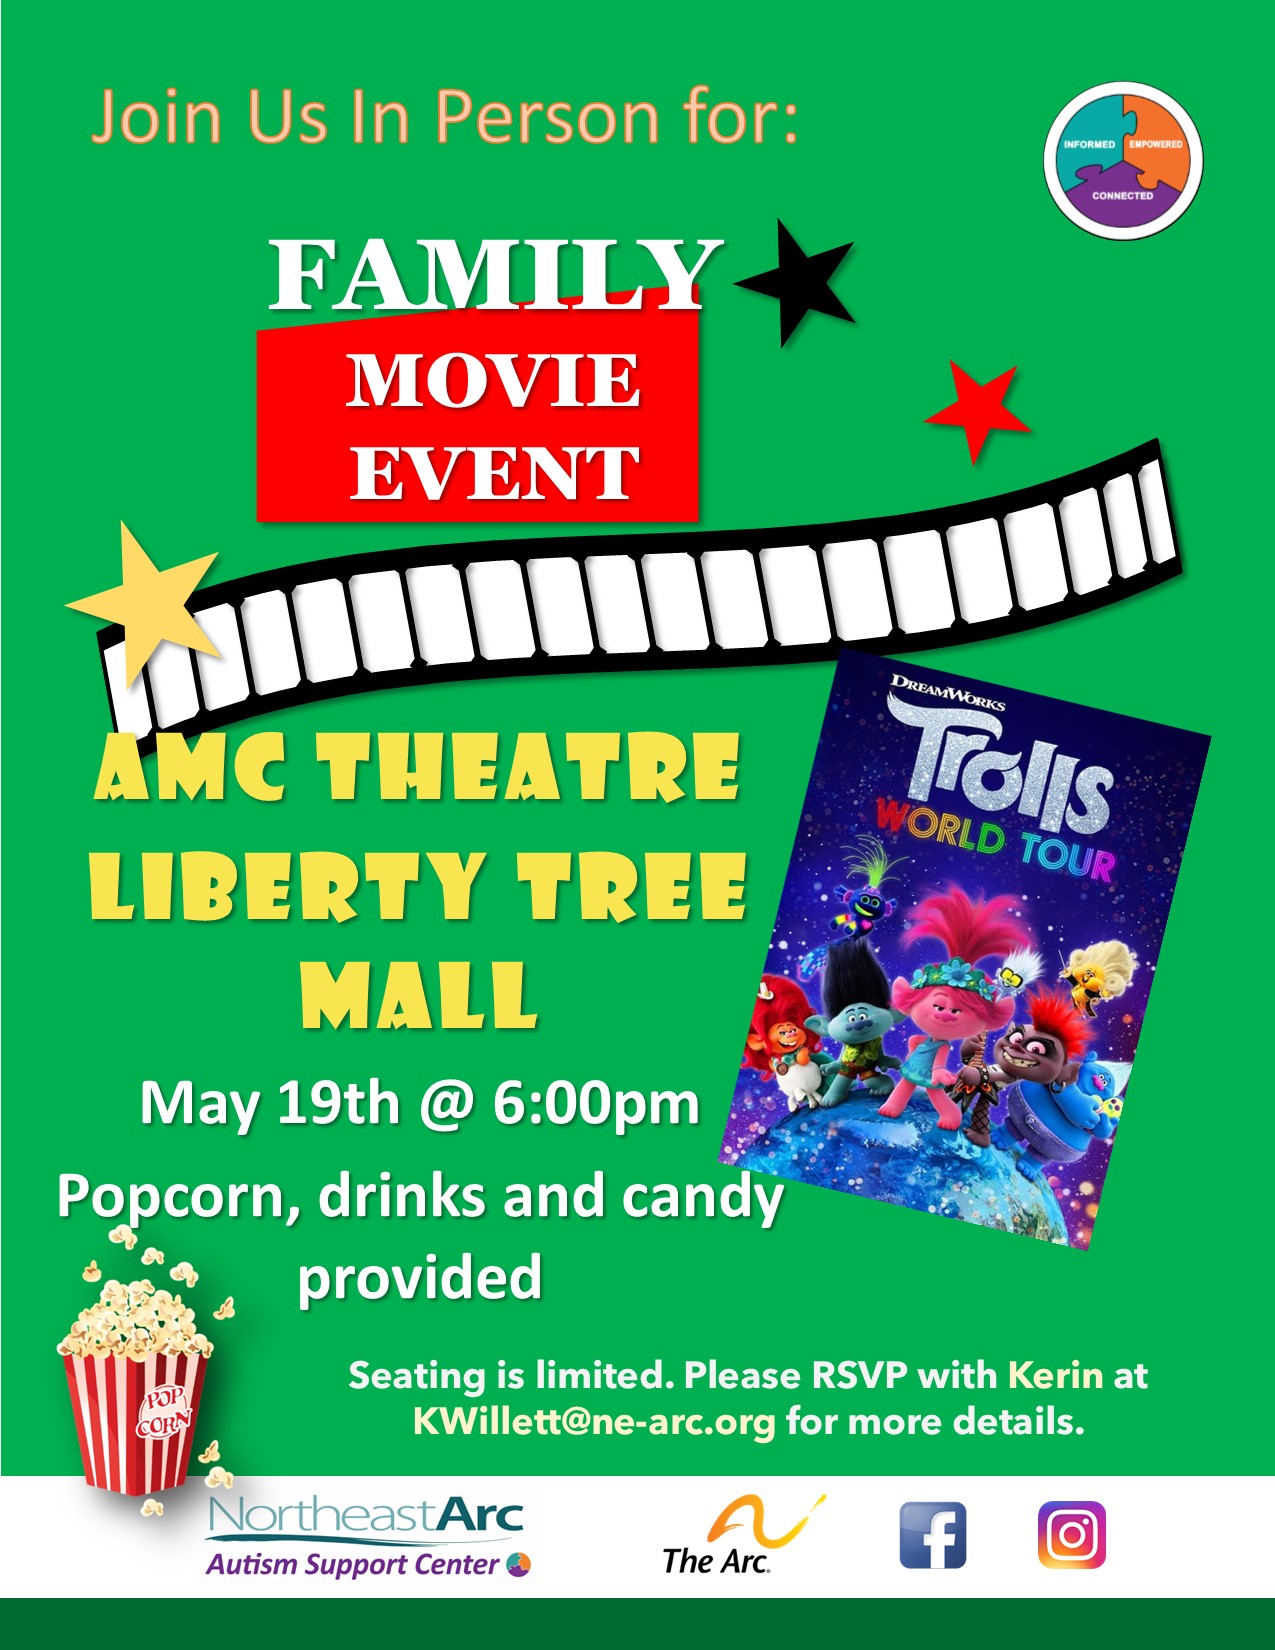 Flyer for an in-person movie event offered by the Northeast Arc Autism Support Center. The movie is Trolls World Tour, playing at the AMC Theater Liberty Tree Mall Danvers. The event is May 19 at 6pm. Please contact Kerin at KWillett@ne-arc.org to register and for more details.